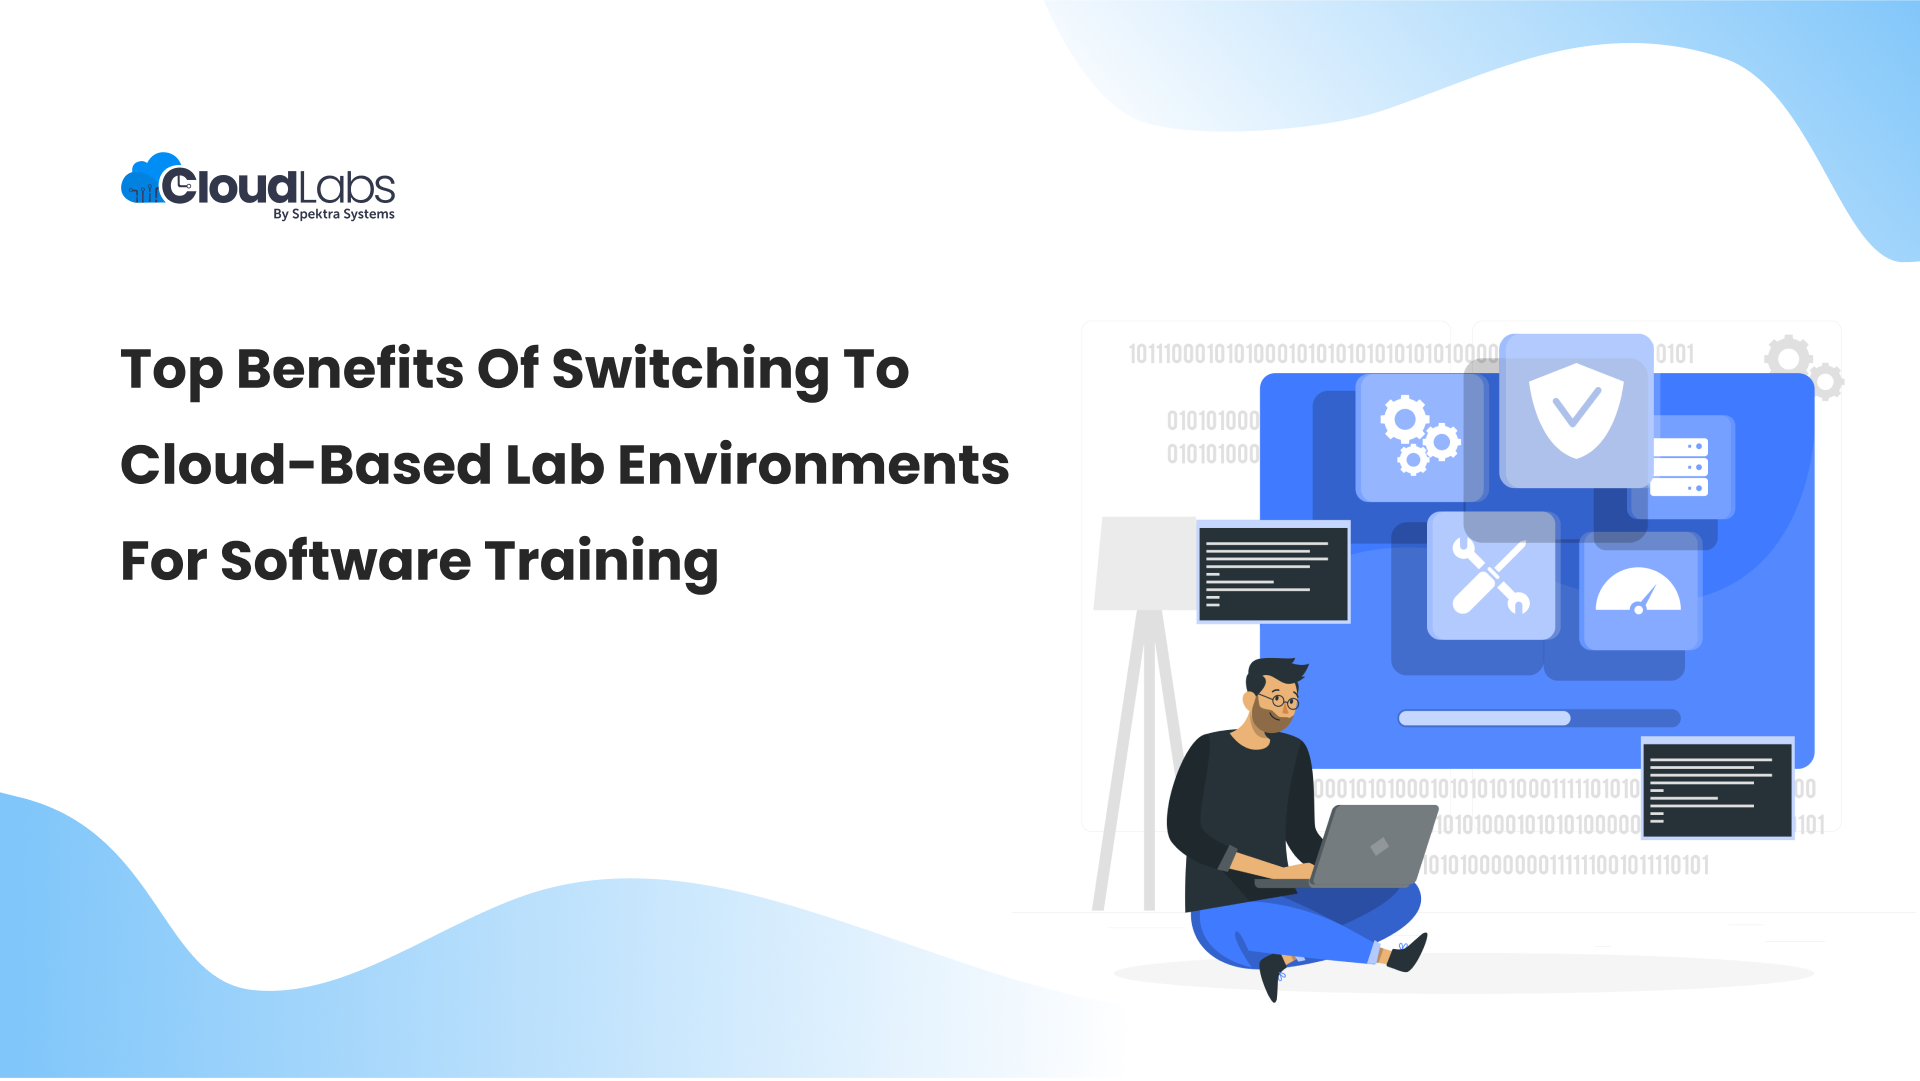 Top Benefits of Switching to Cloud-Based Lab Environments for Software Training